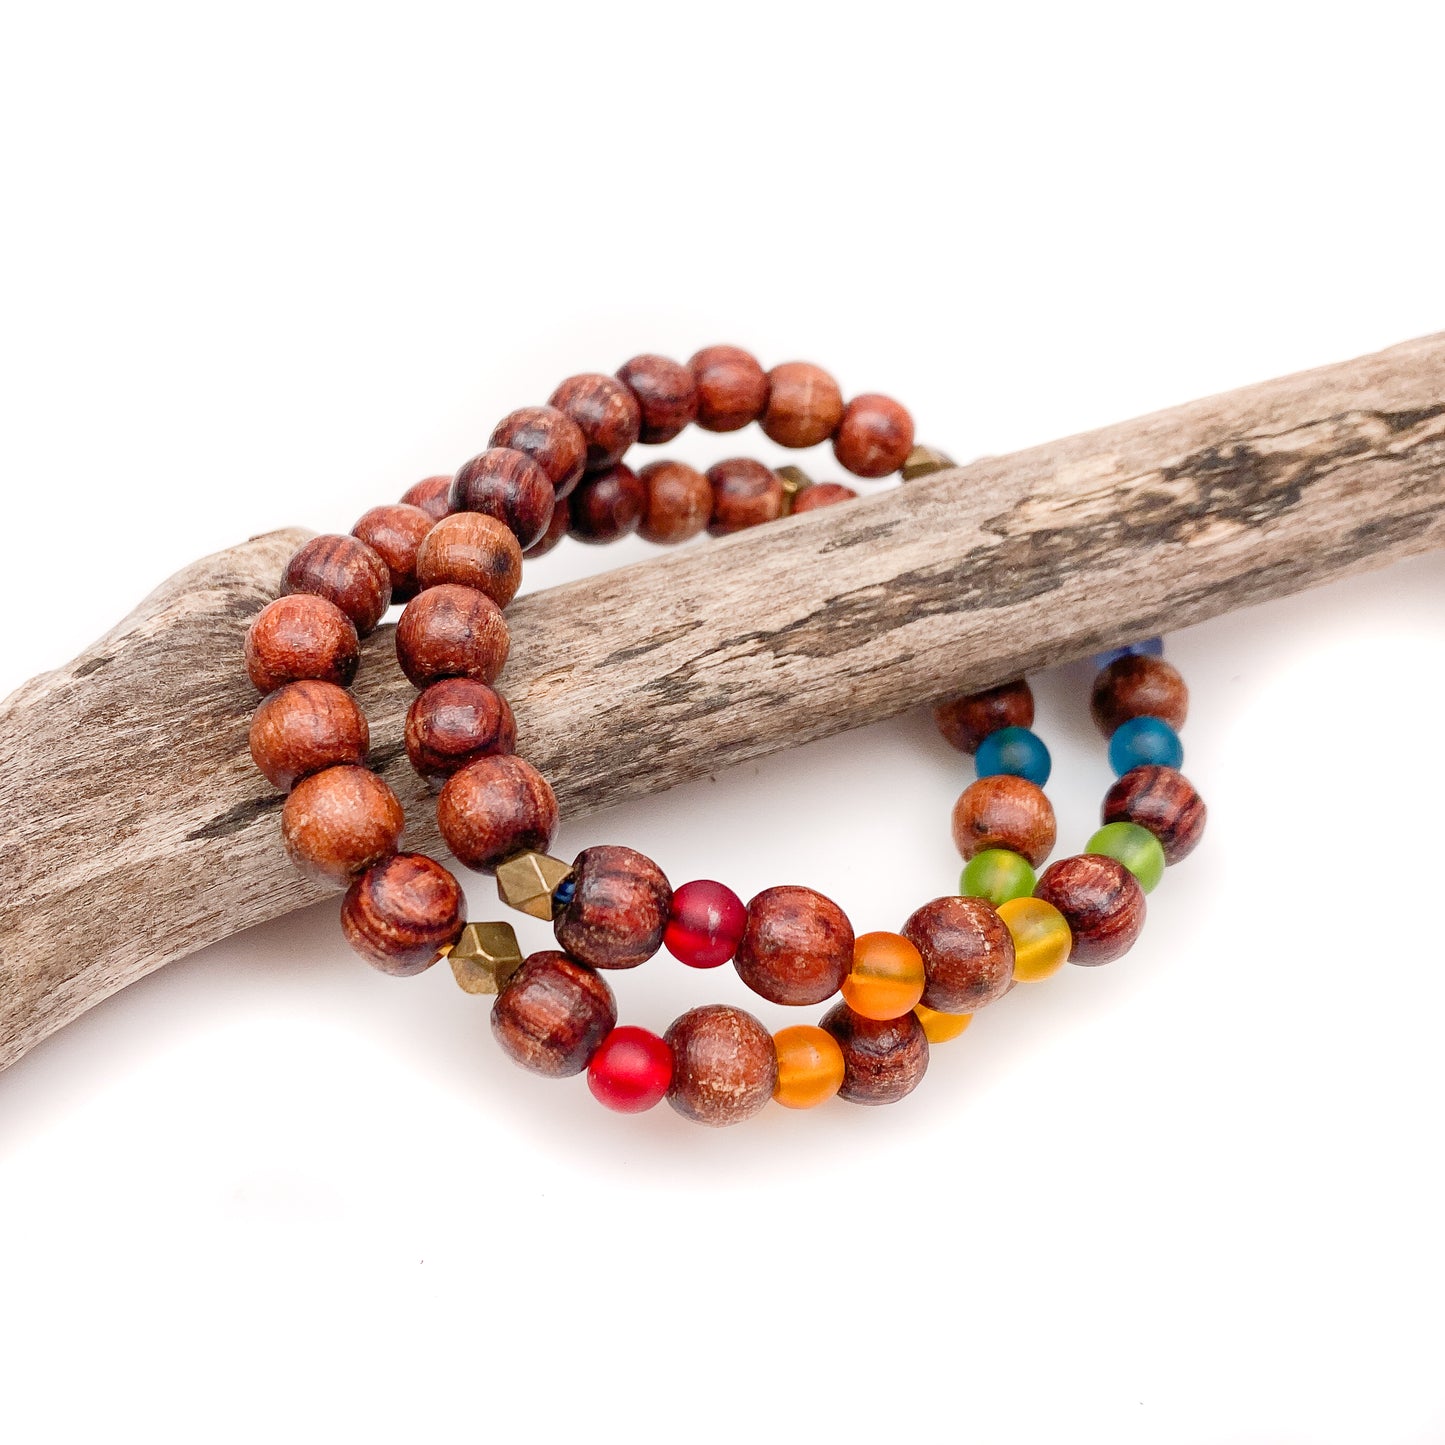 Rainbow Chakra Wood and Recycled Glass Stretchy Cord Bracelet - 3 sizes